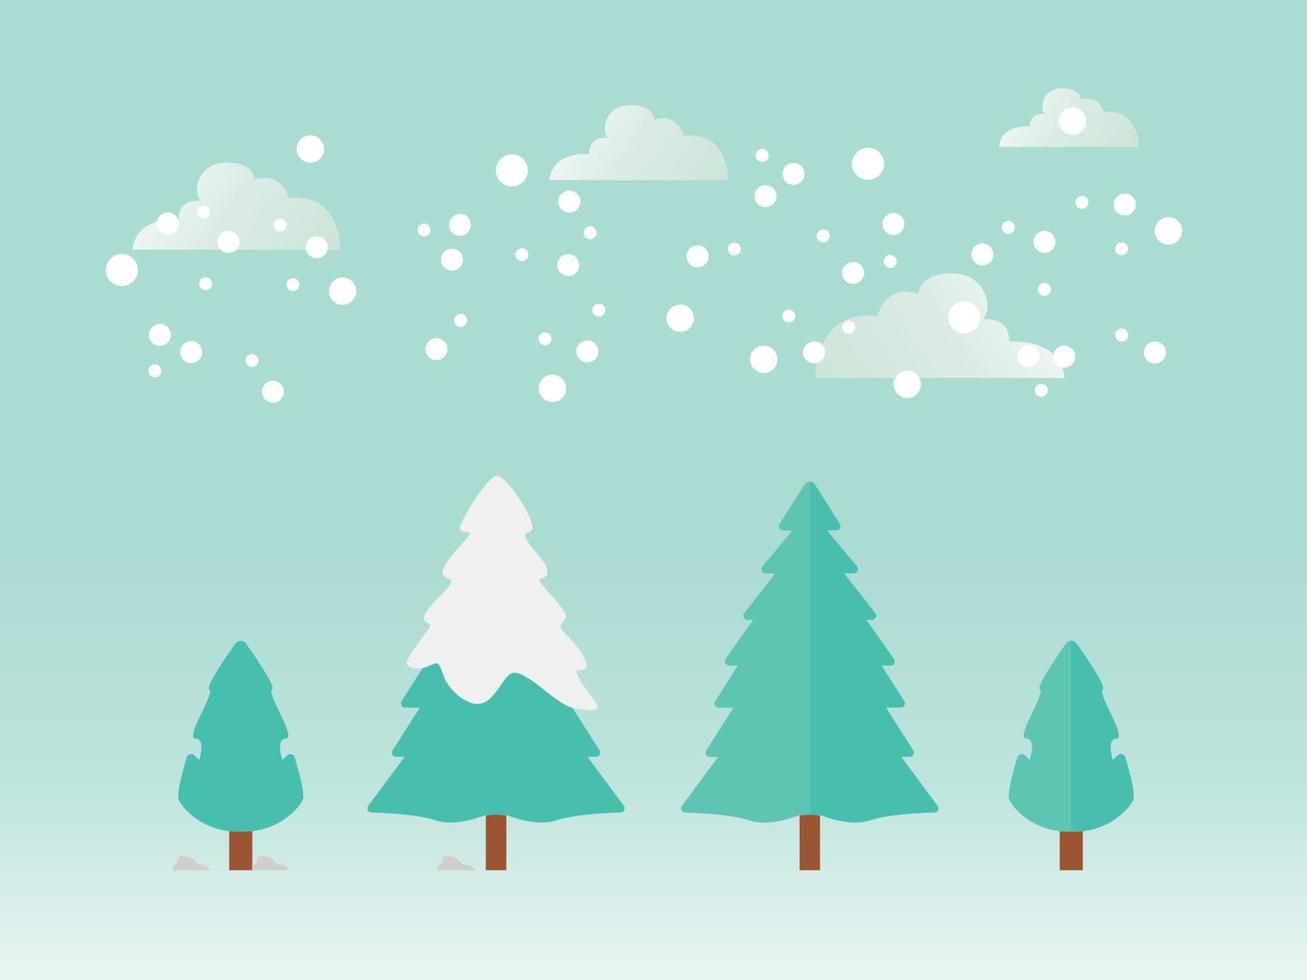 tree with snow, snowing in winter, winter background with snowy trees vector